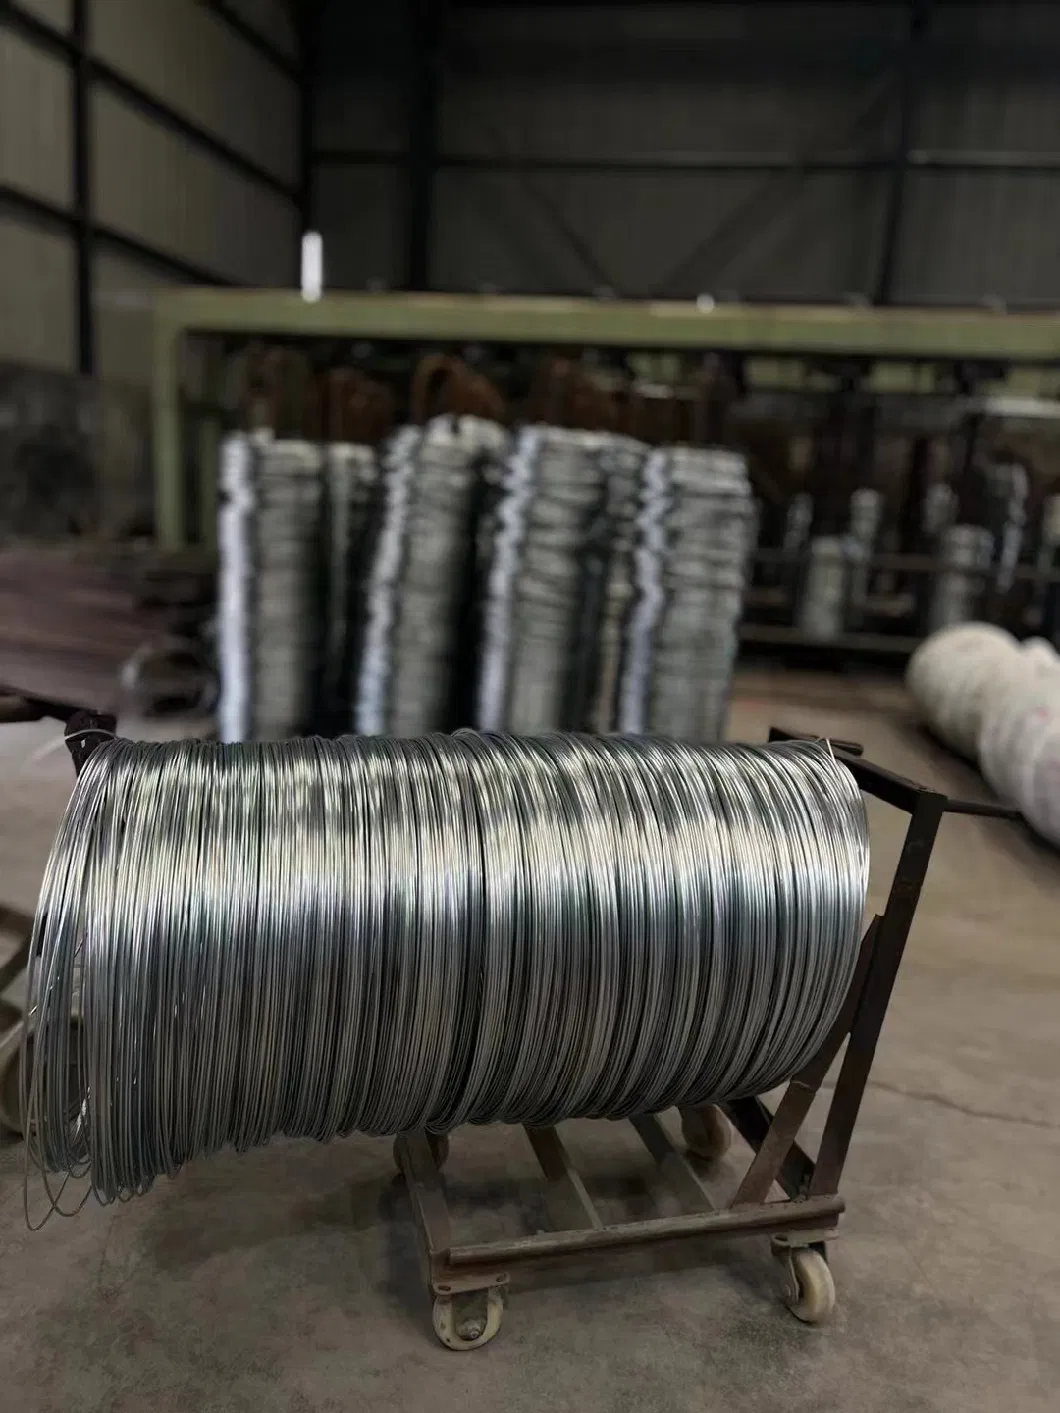 Chinese Factory Manufacturing 0.3-5mm Electric Galvanized Iron Wire Low Carbon